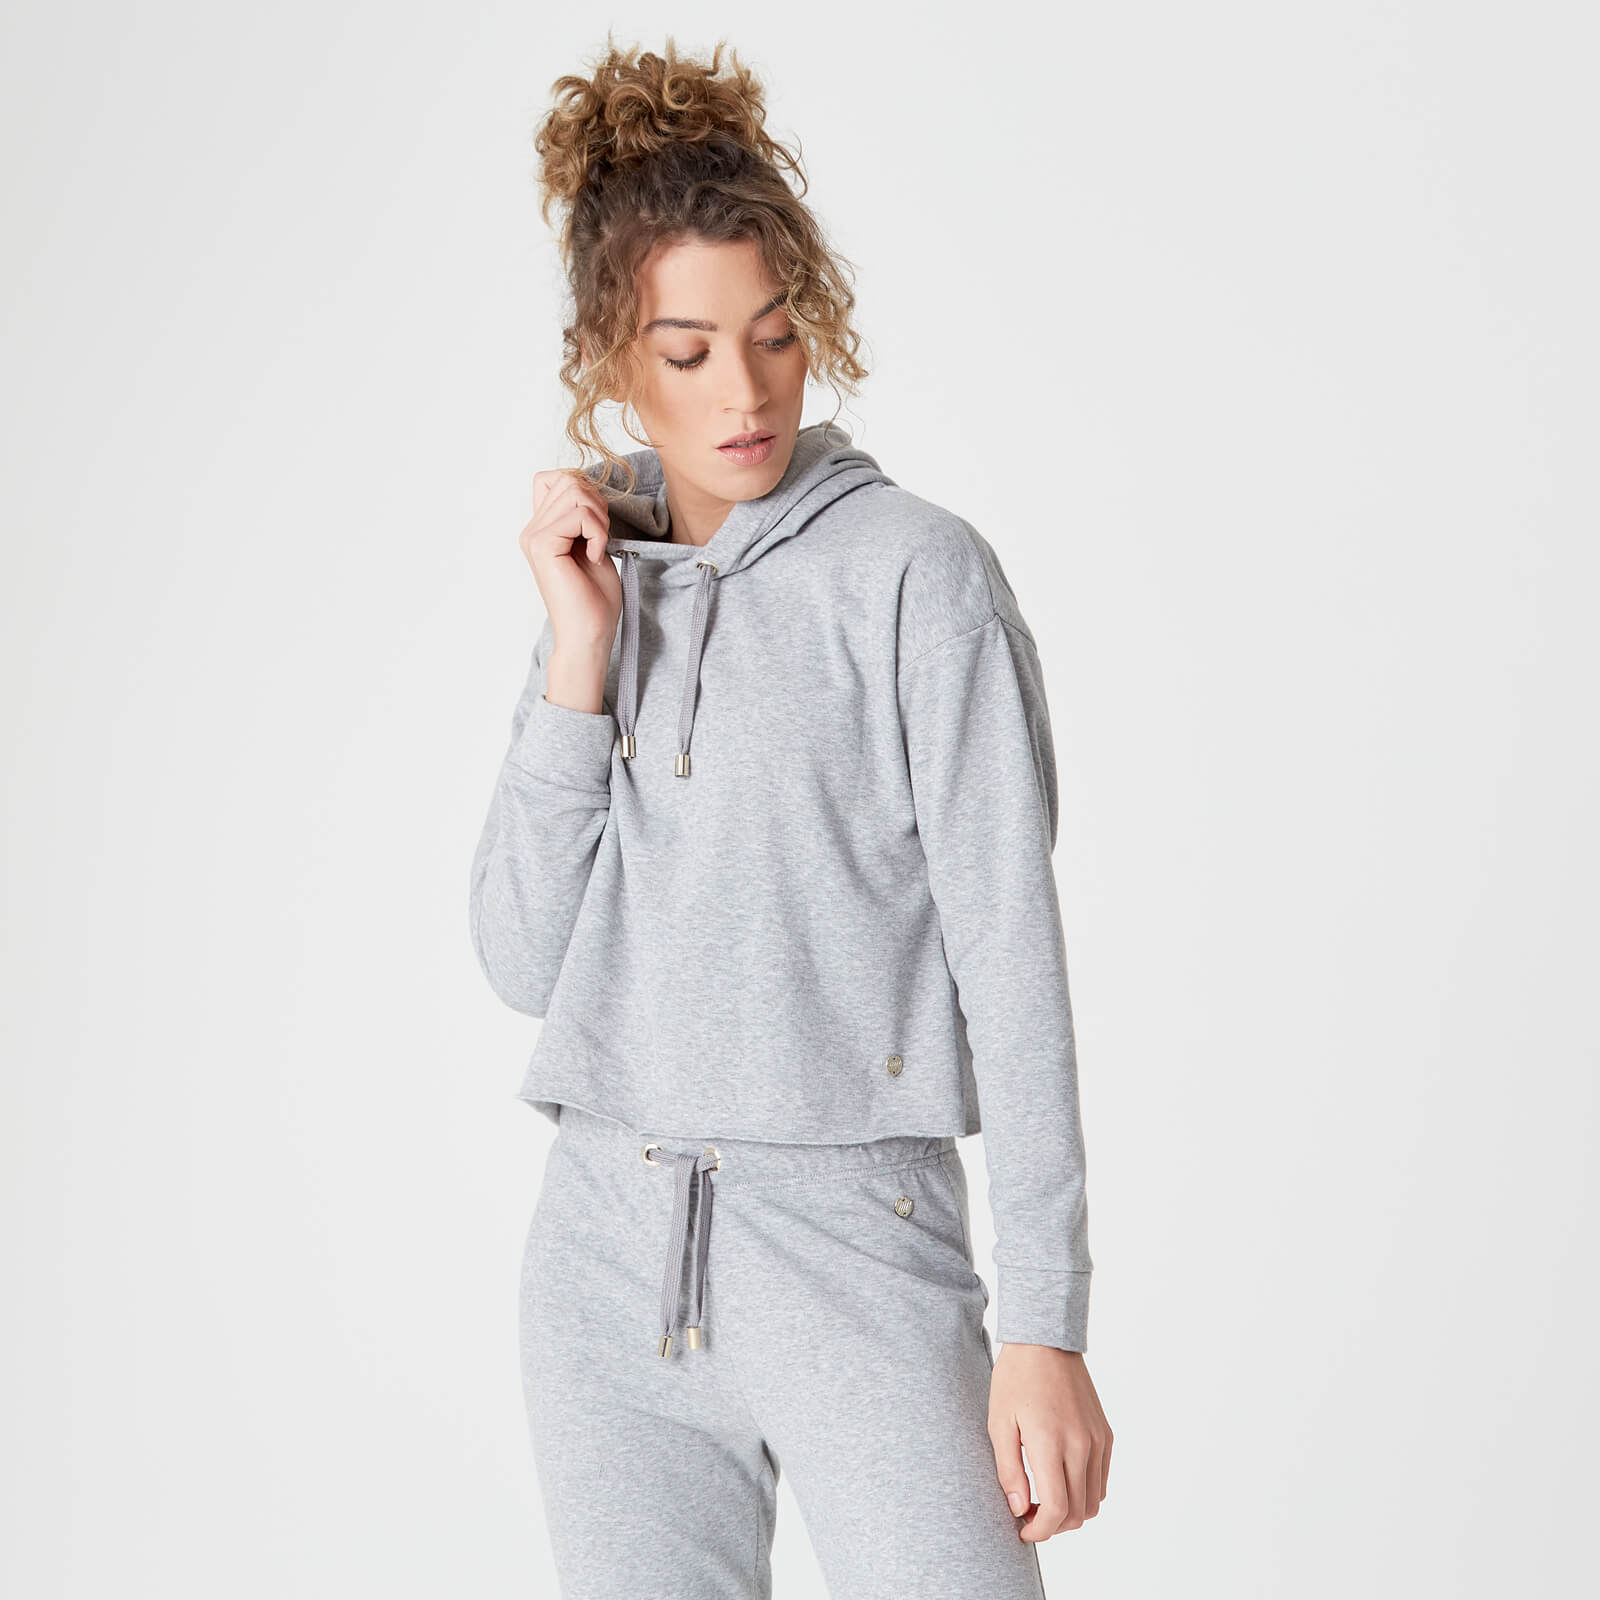 Myprotein Luxe Lounge Hoodie - Grey Marl - S